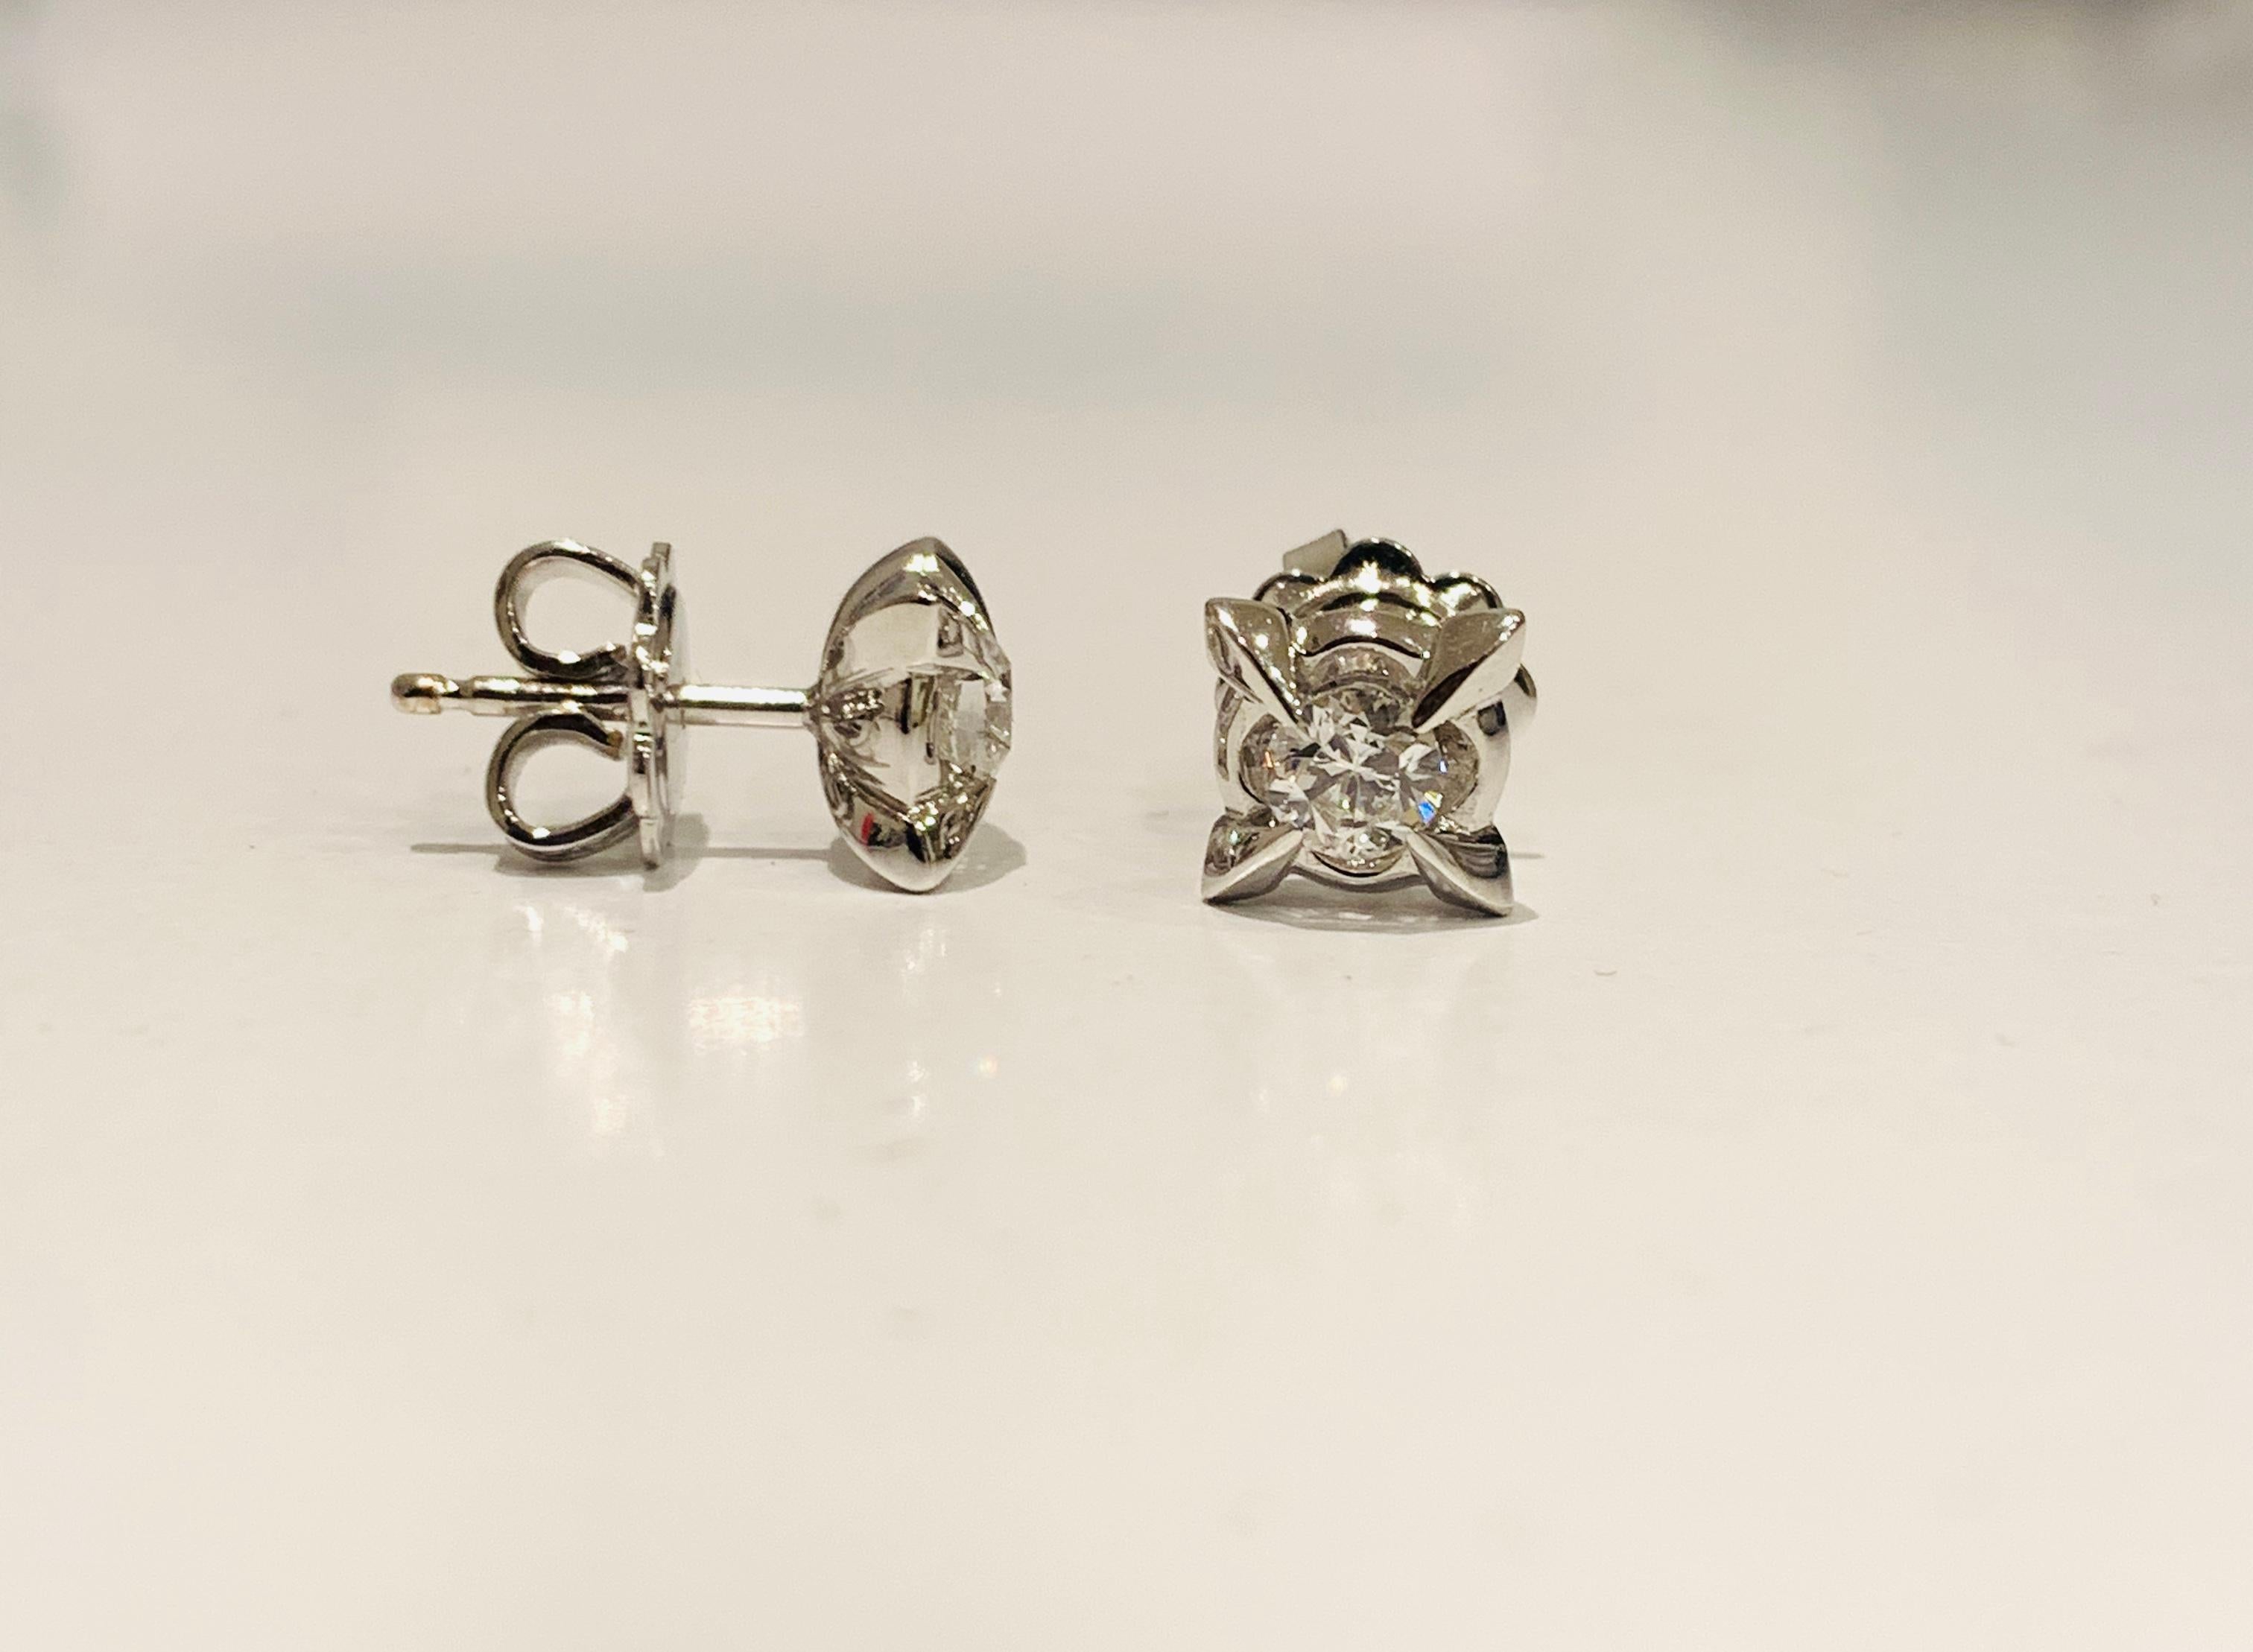 These 0.46 Carat Diamond stud earrings are set in 18Kt white Gold. From the Leonardo da Vinci Cut Renaissance line. The diamond was cut using the divine proportions and is based on Leonardo's stone drawings. 

Secured on the ear with butterfly back